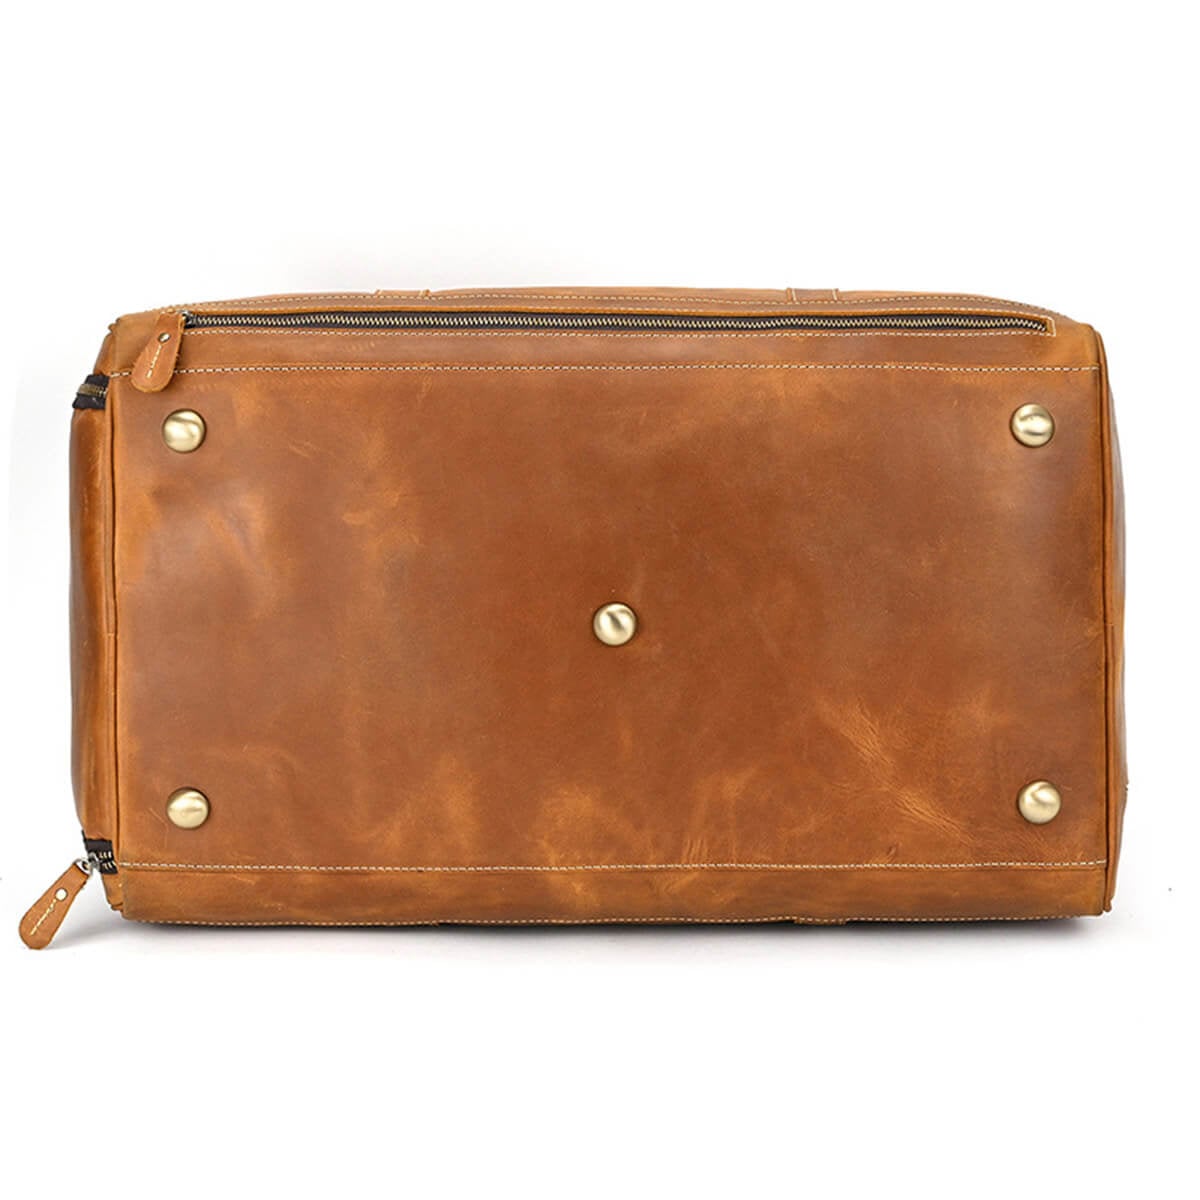 Durable Leather Bag